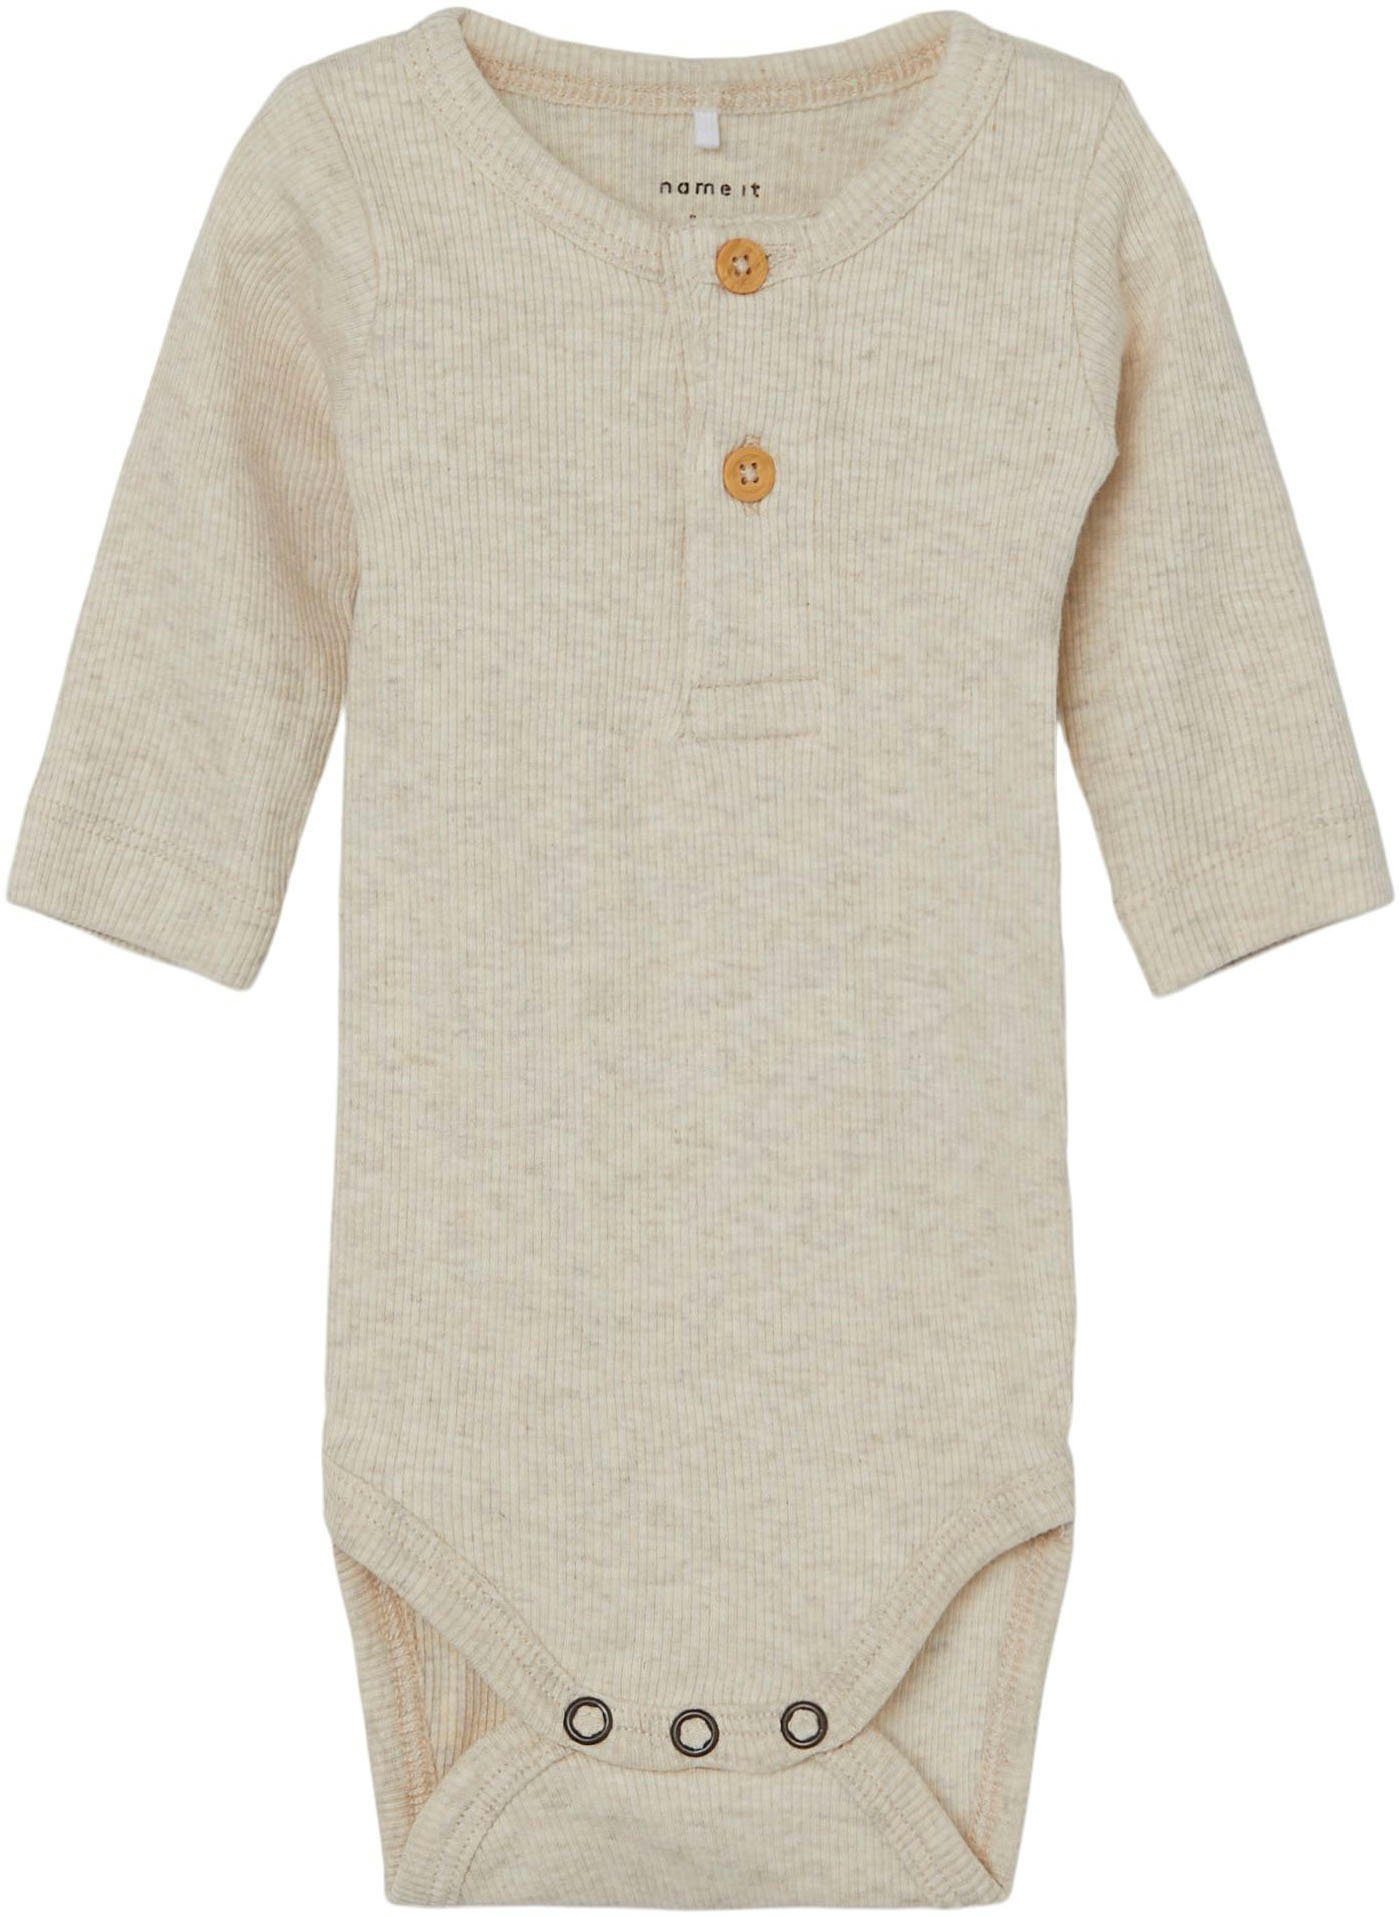 Baby\'s Only Online-Shop | OTTO